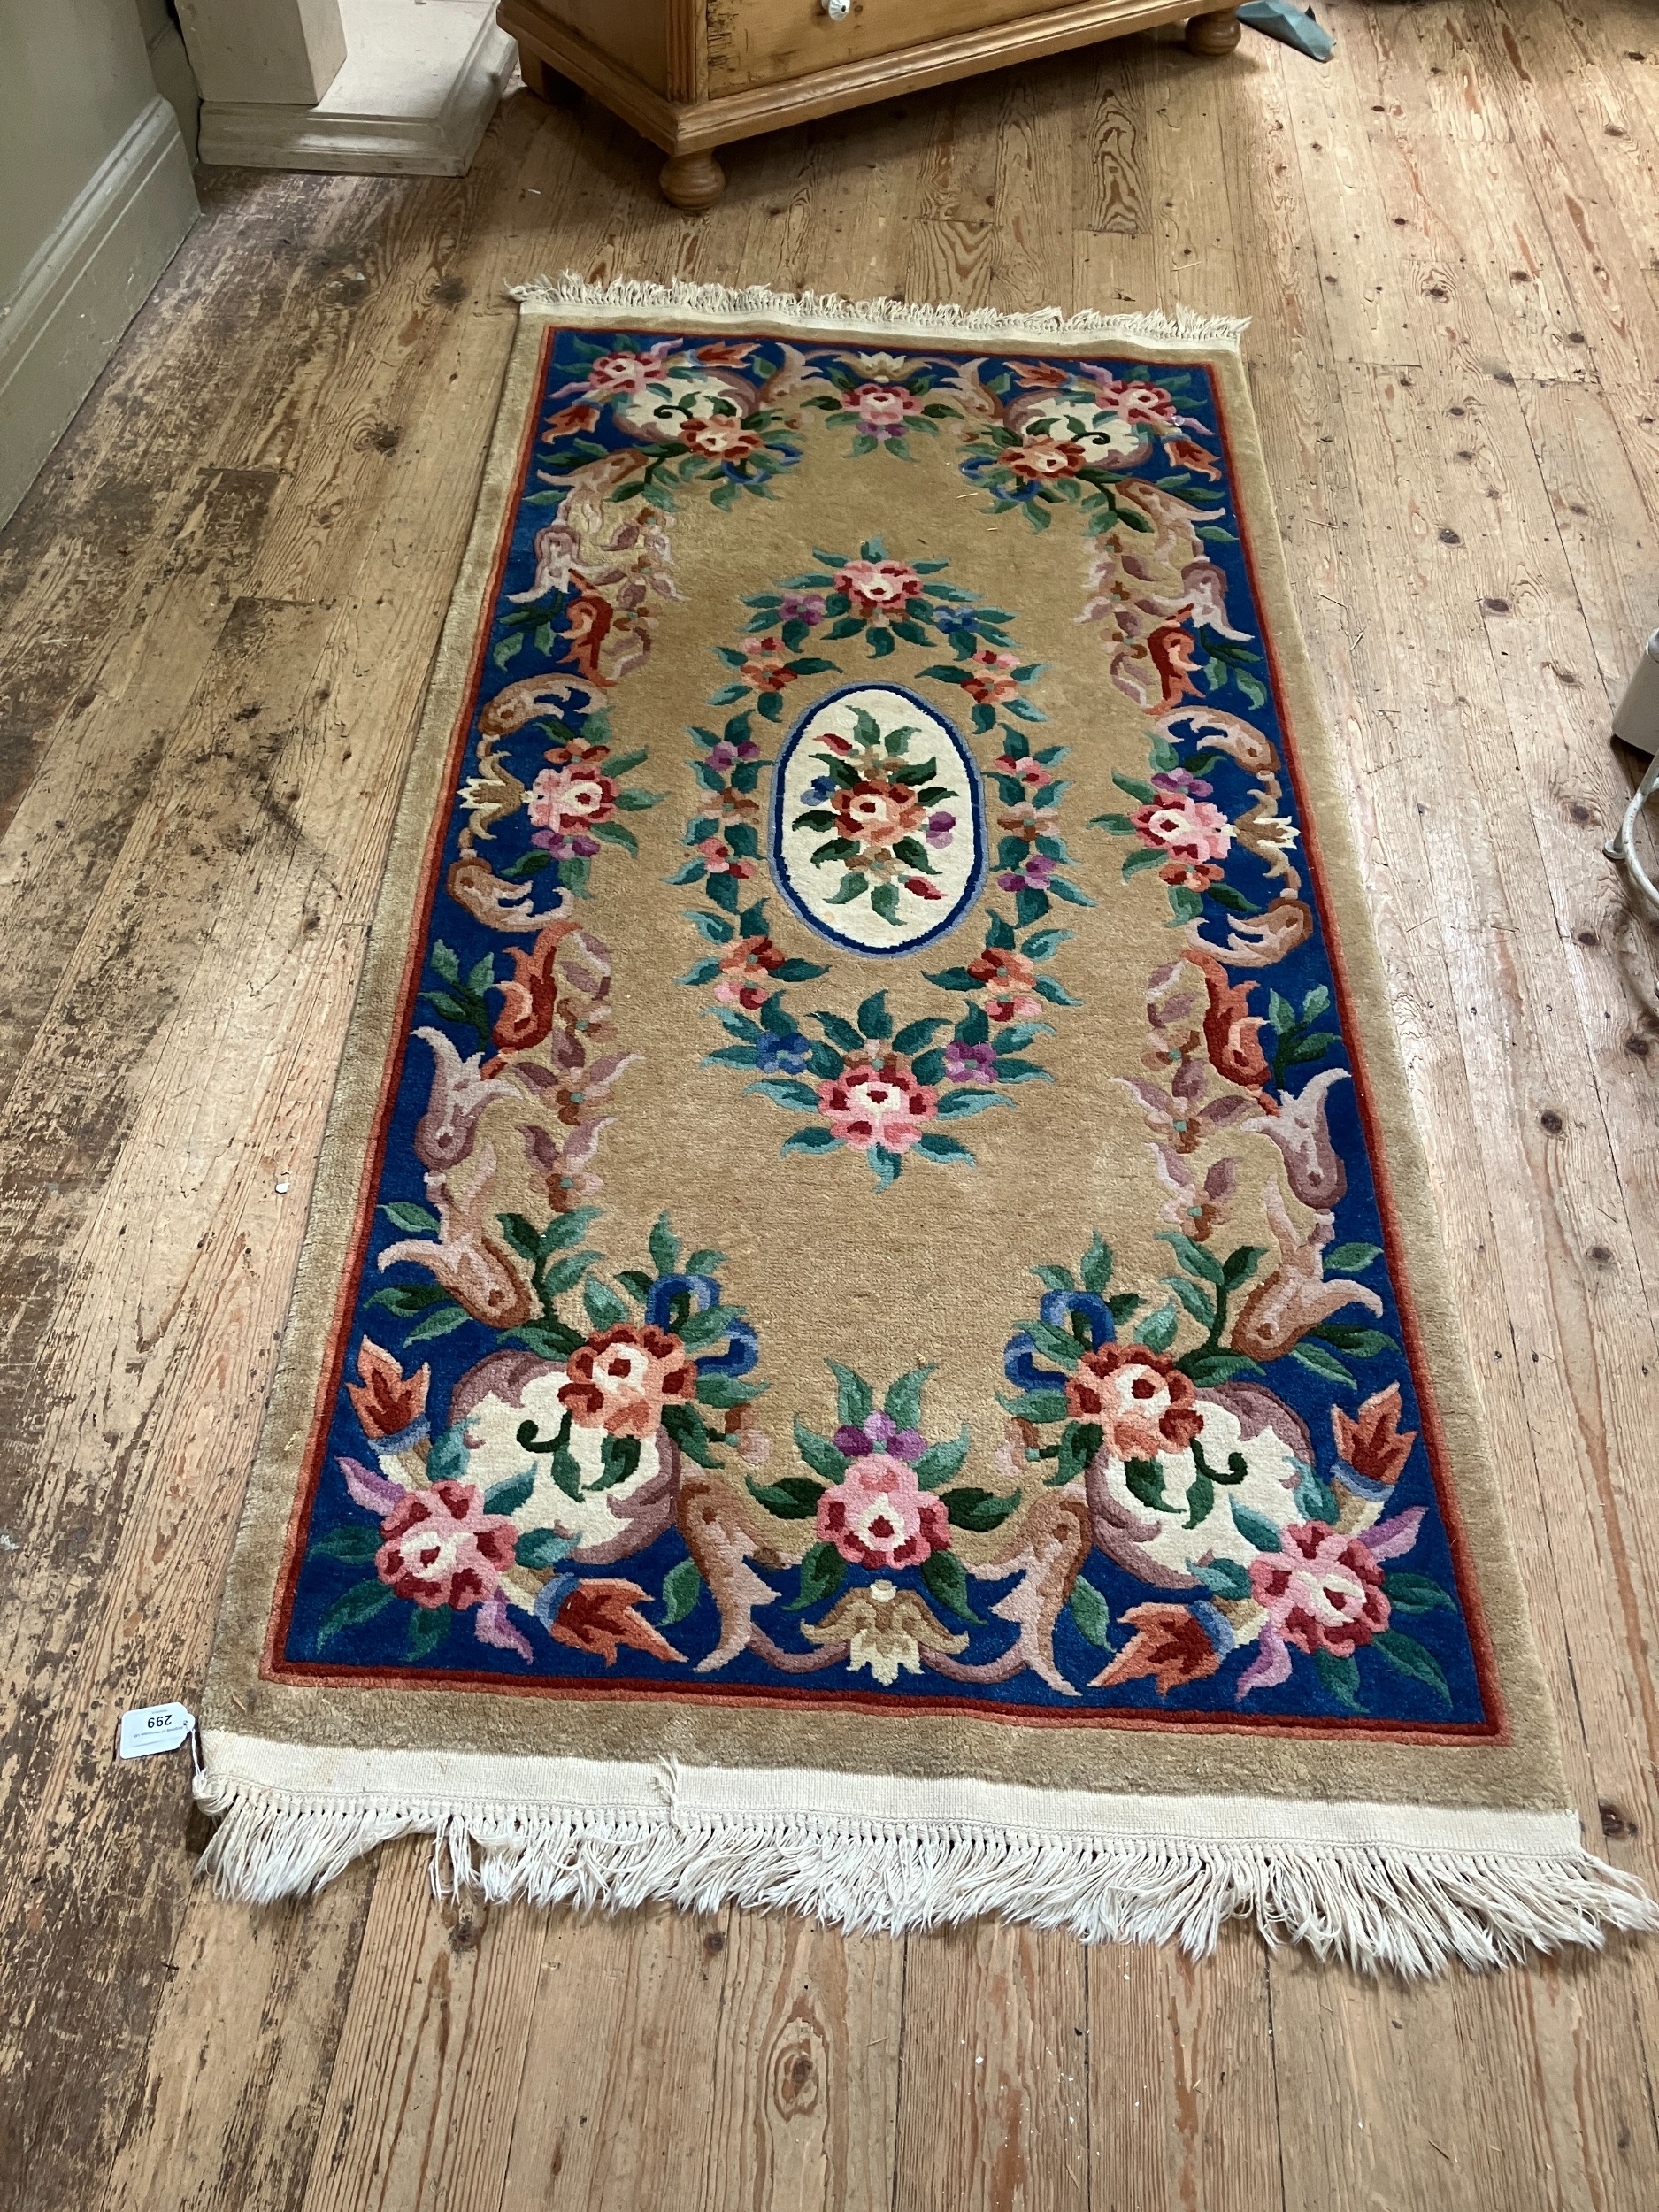 A Chinese wool rug of blue, rose, green, ivory and camel in a floral design - Image 2 of 2